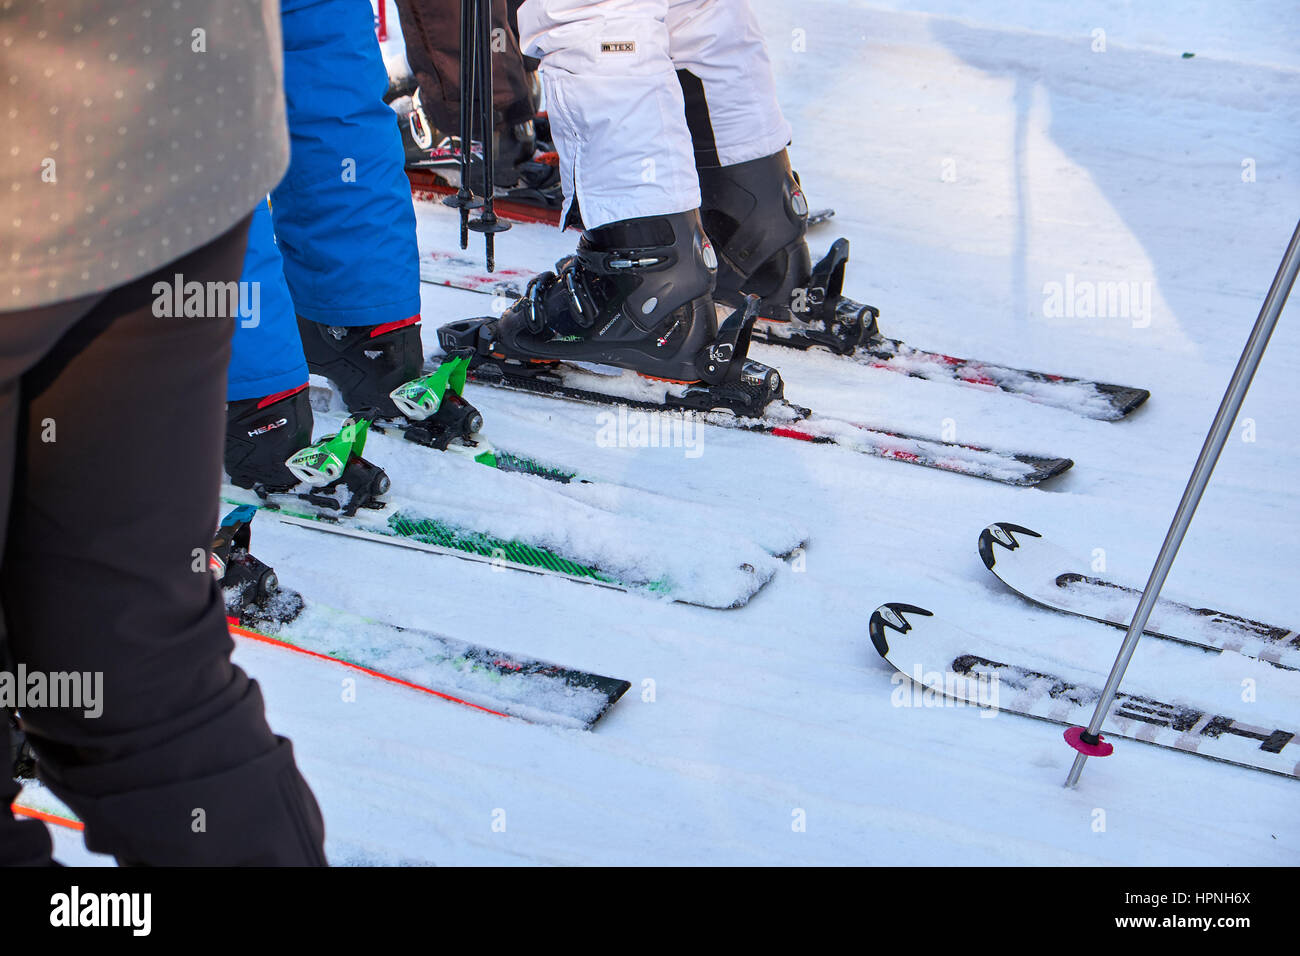 WINTERBERG, GERMANY - FEBRUARY 14, 2017: The legs and skies of people waiting in a lift line at Ski Carousel Winterberg Stock Photo